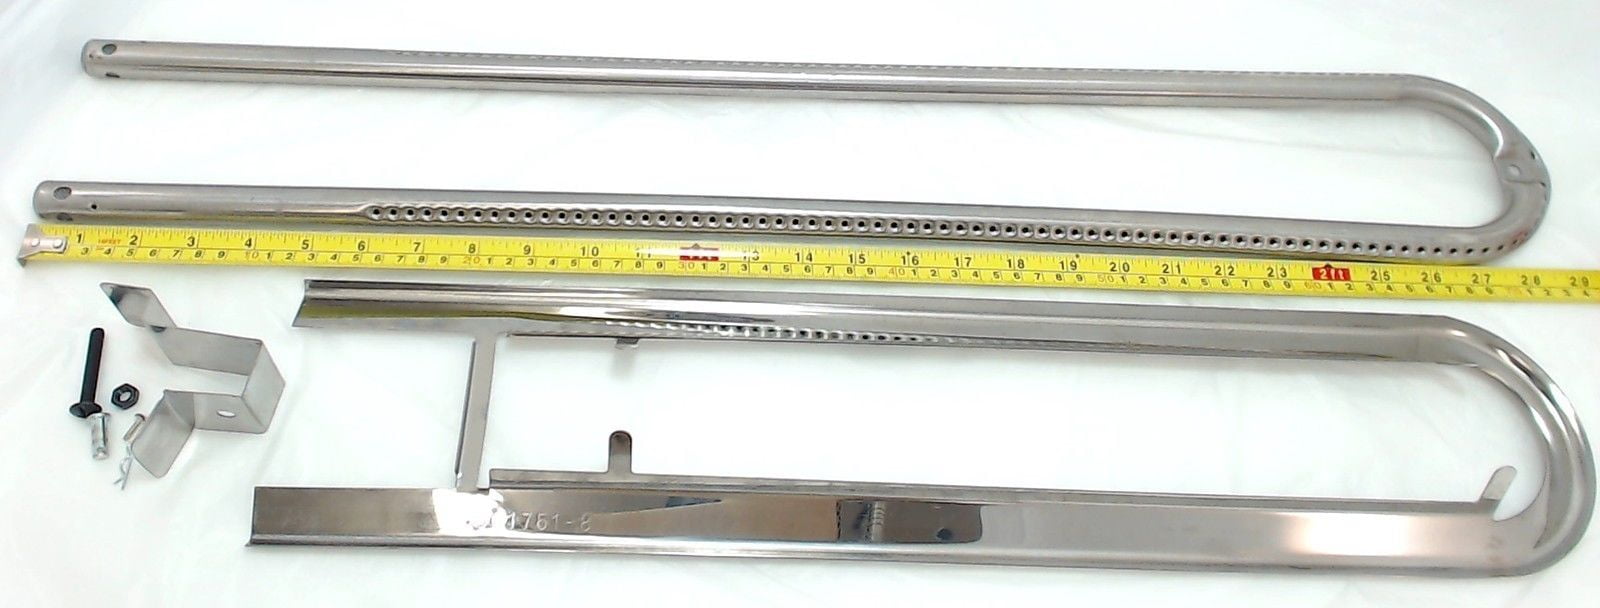 Stainless steel burner for Charbroil, Kenmore, Thermos brand gas grills